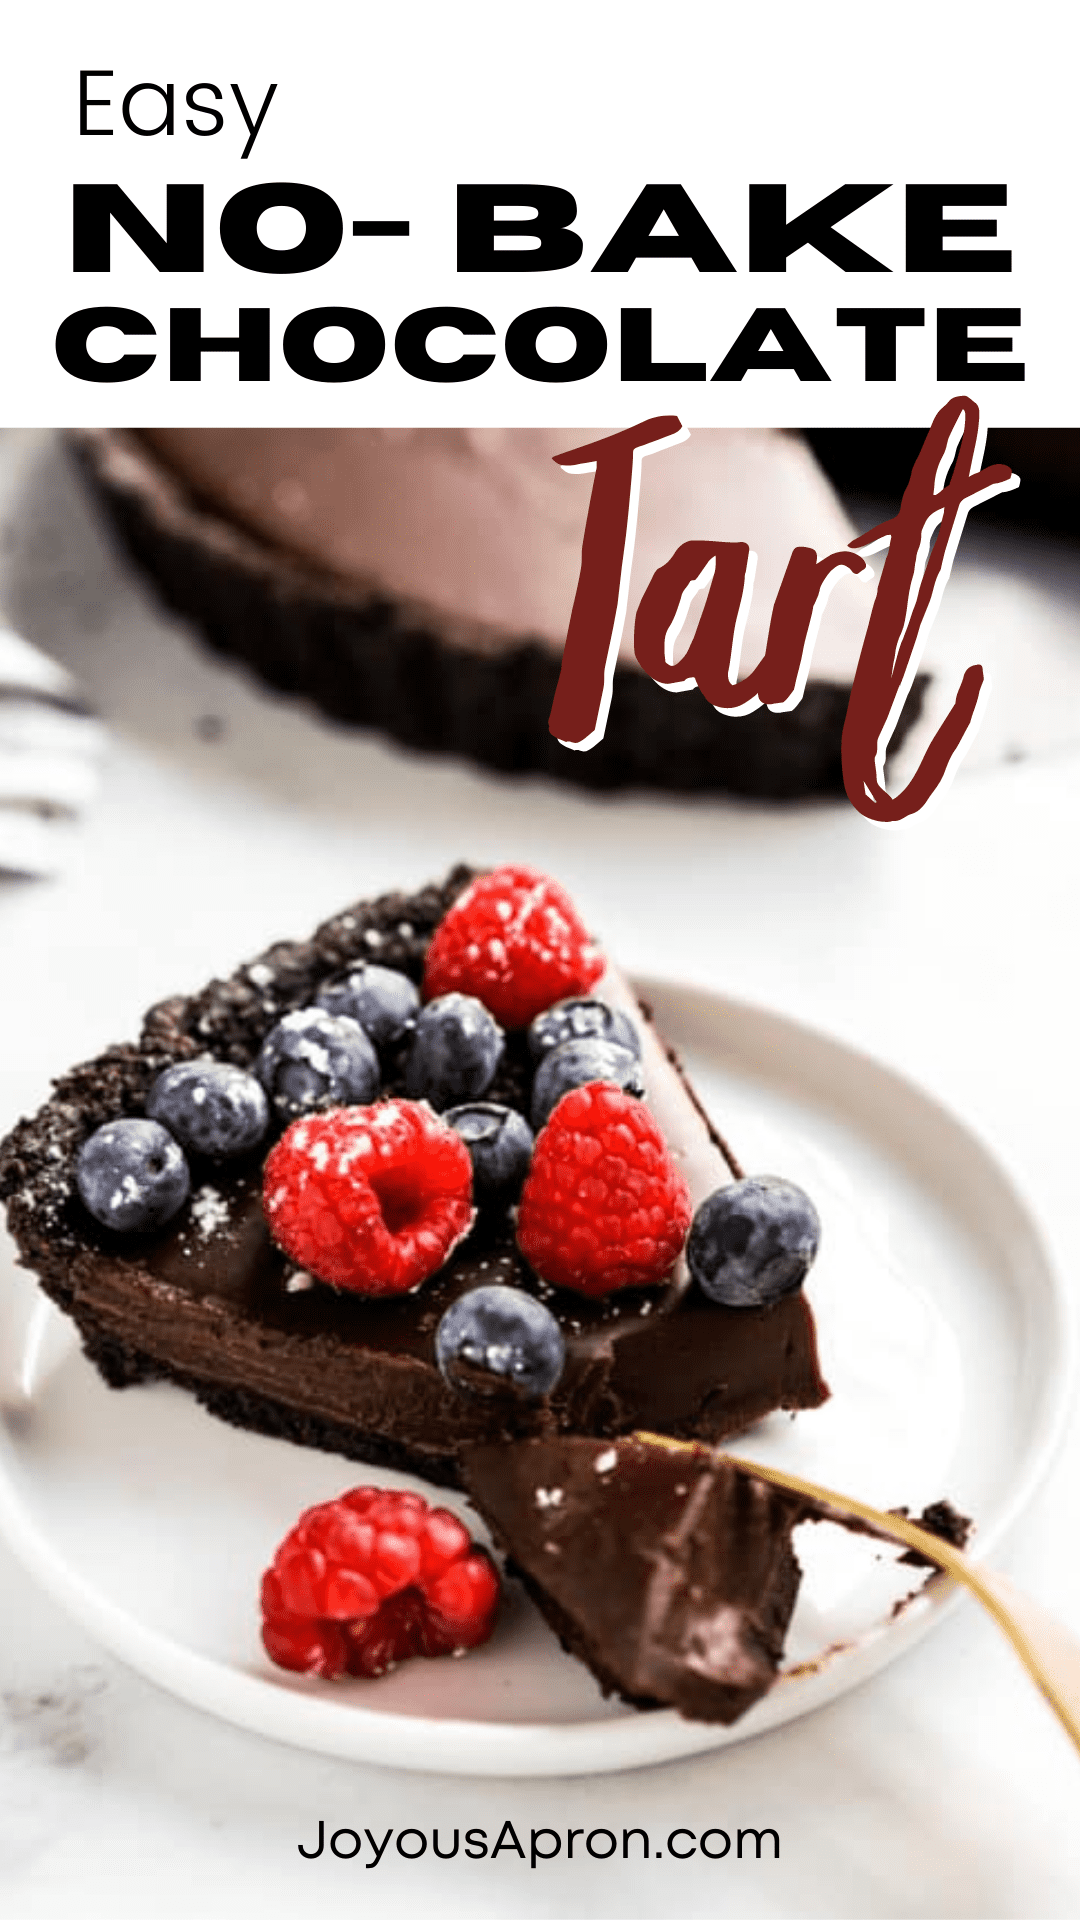 No-Bake Chocolate Tart - Oreo crust topped with rich, velvety dark chocolate ganache filling, served with berries. A delightful and easy no-bake dessert! via @joyousapron